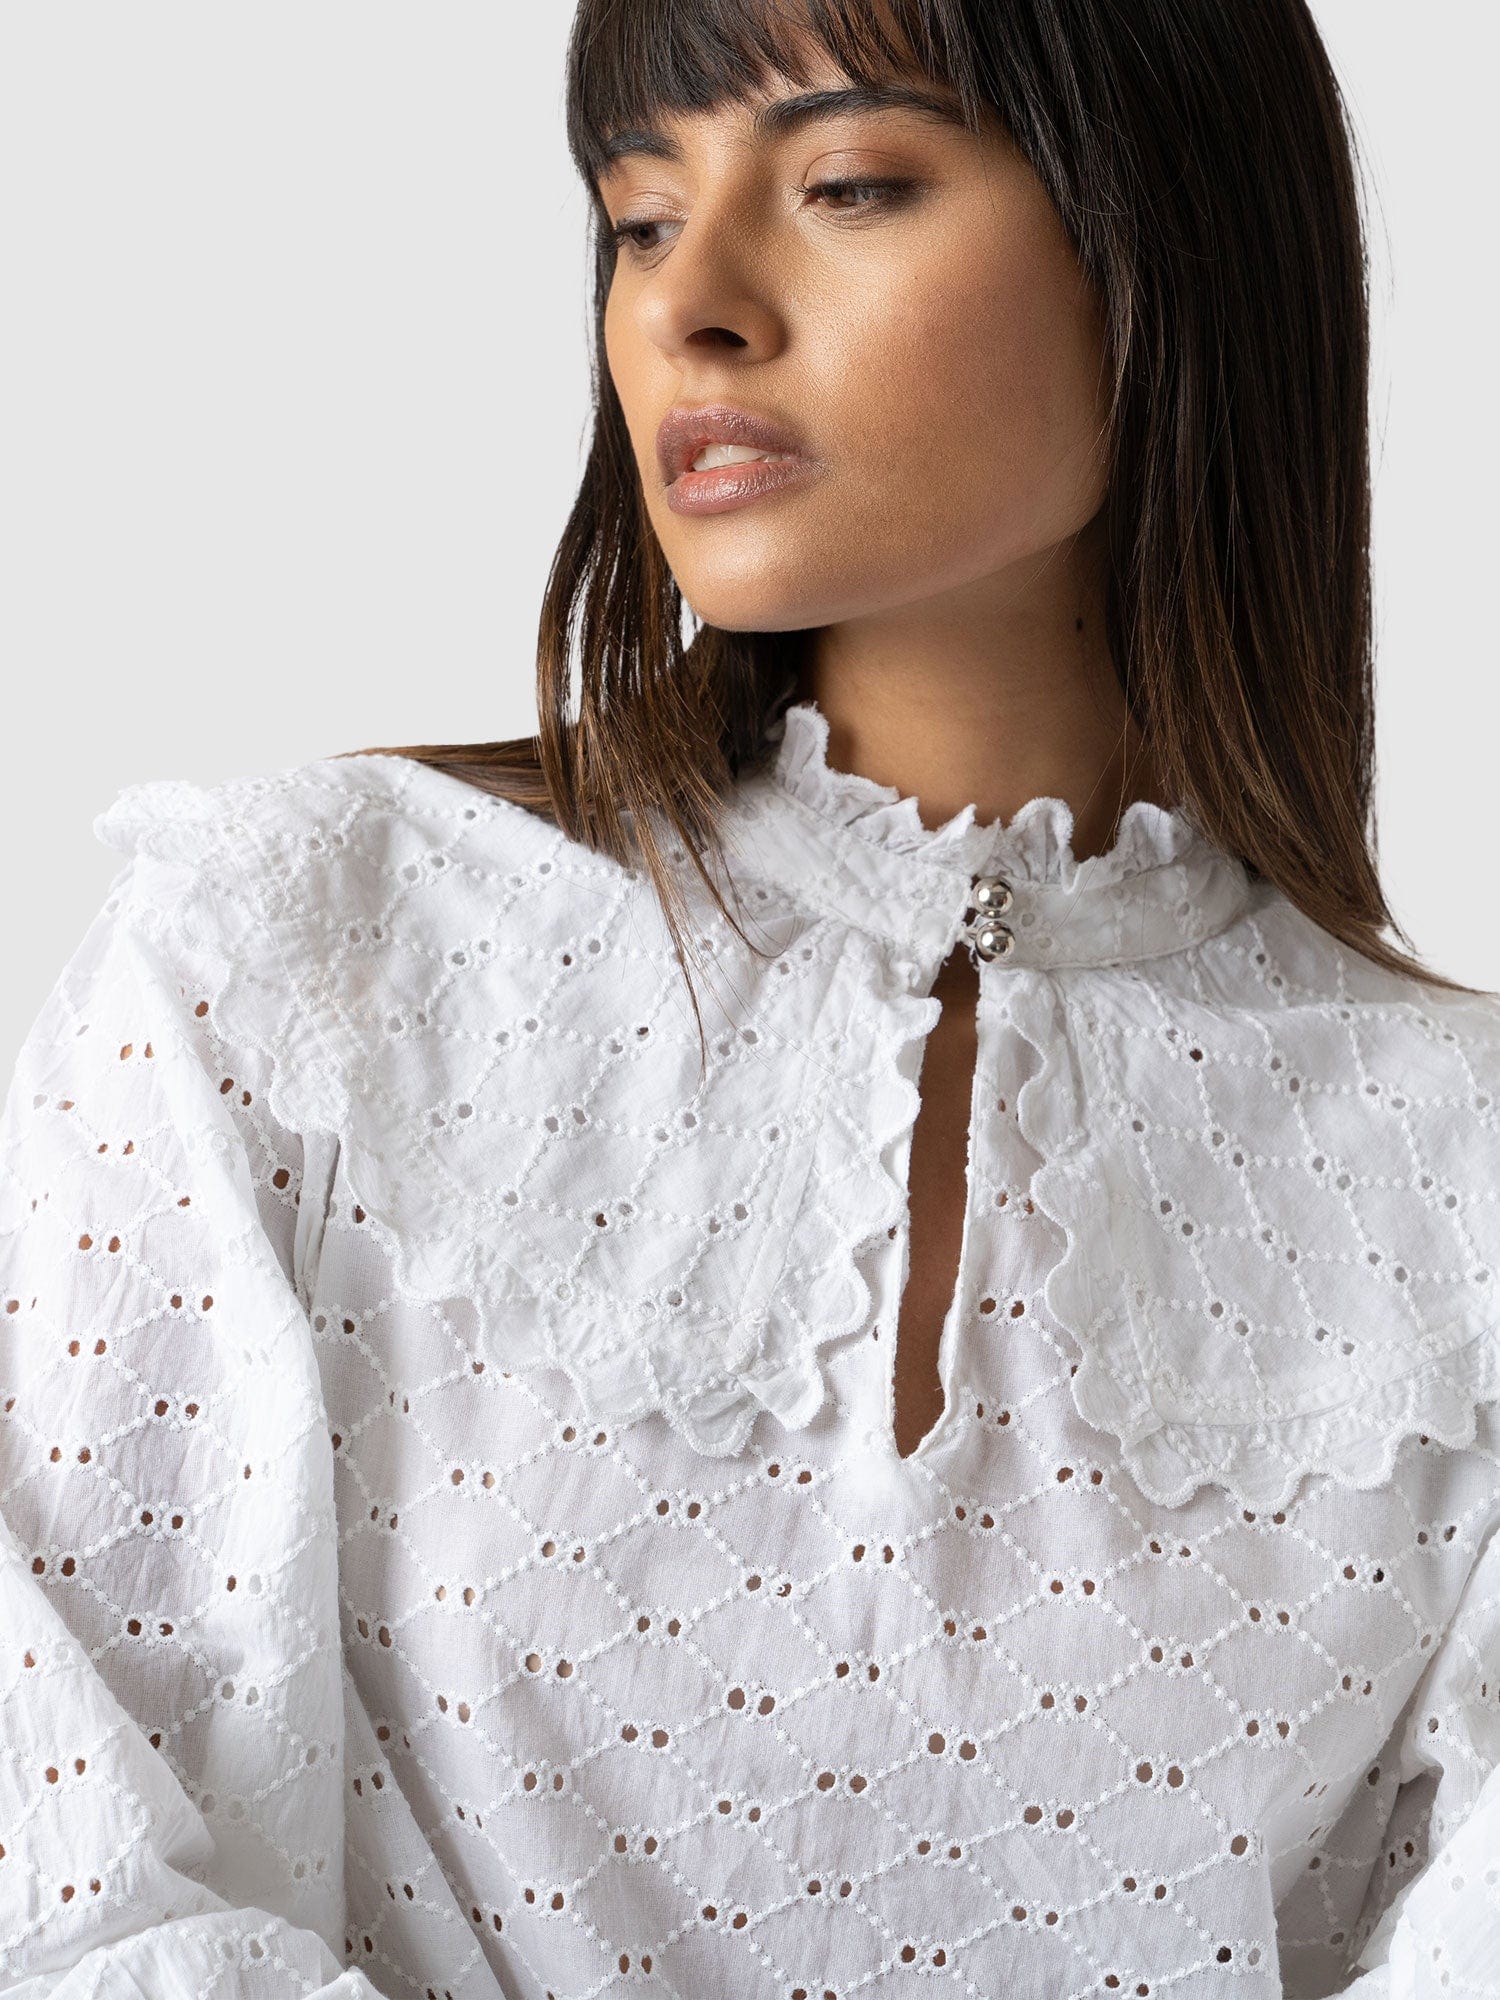 L'Or Tie Collar Blouse White